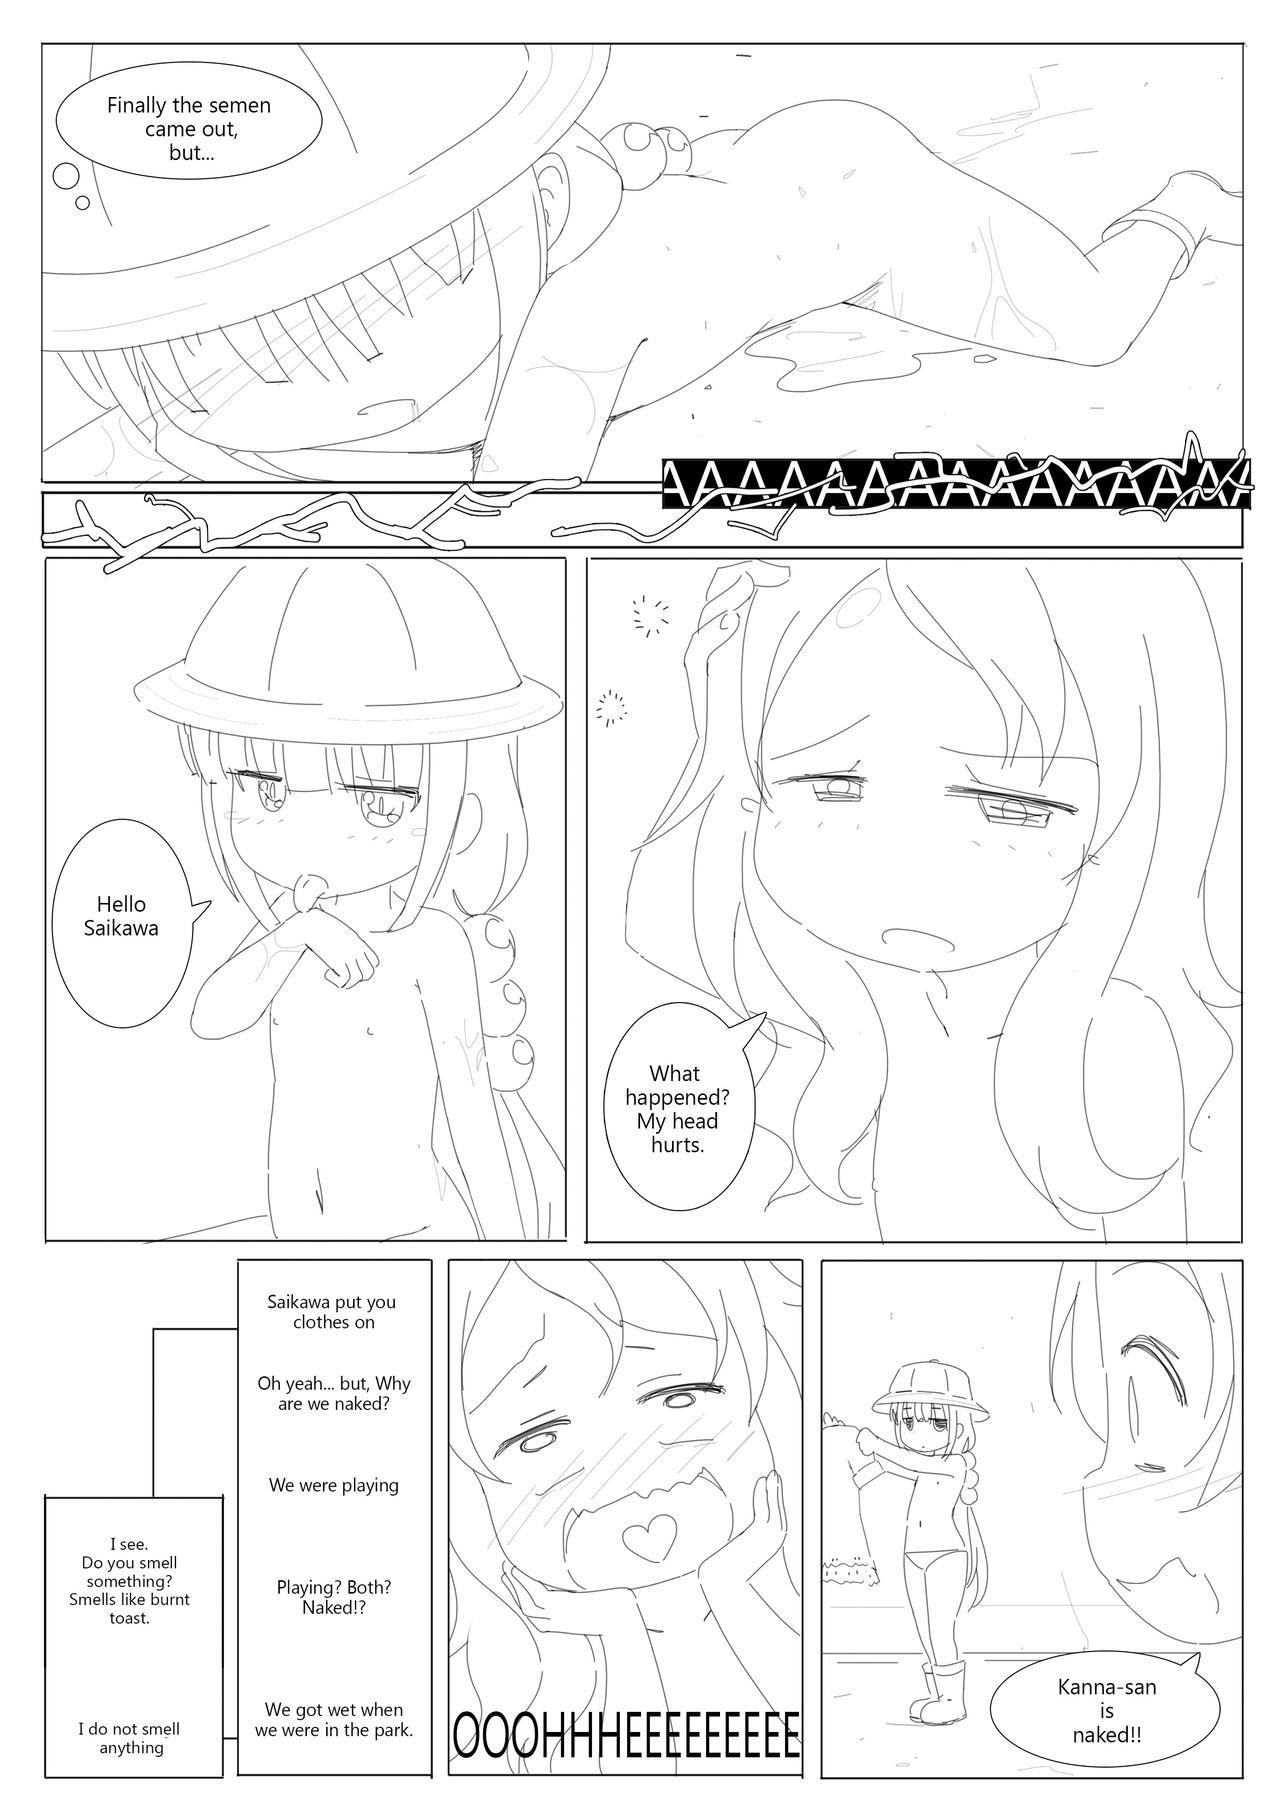 ComicTED Vol 2 [Radioactive Cockroach] Ted The Ero Dinasty (The Cum Hungry Dragon Loli) 10